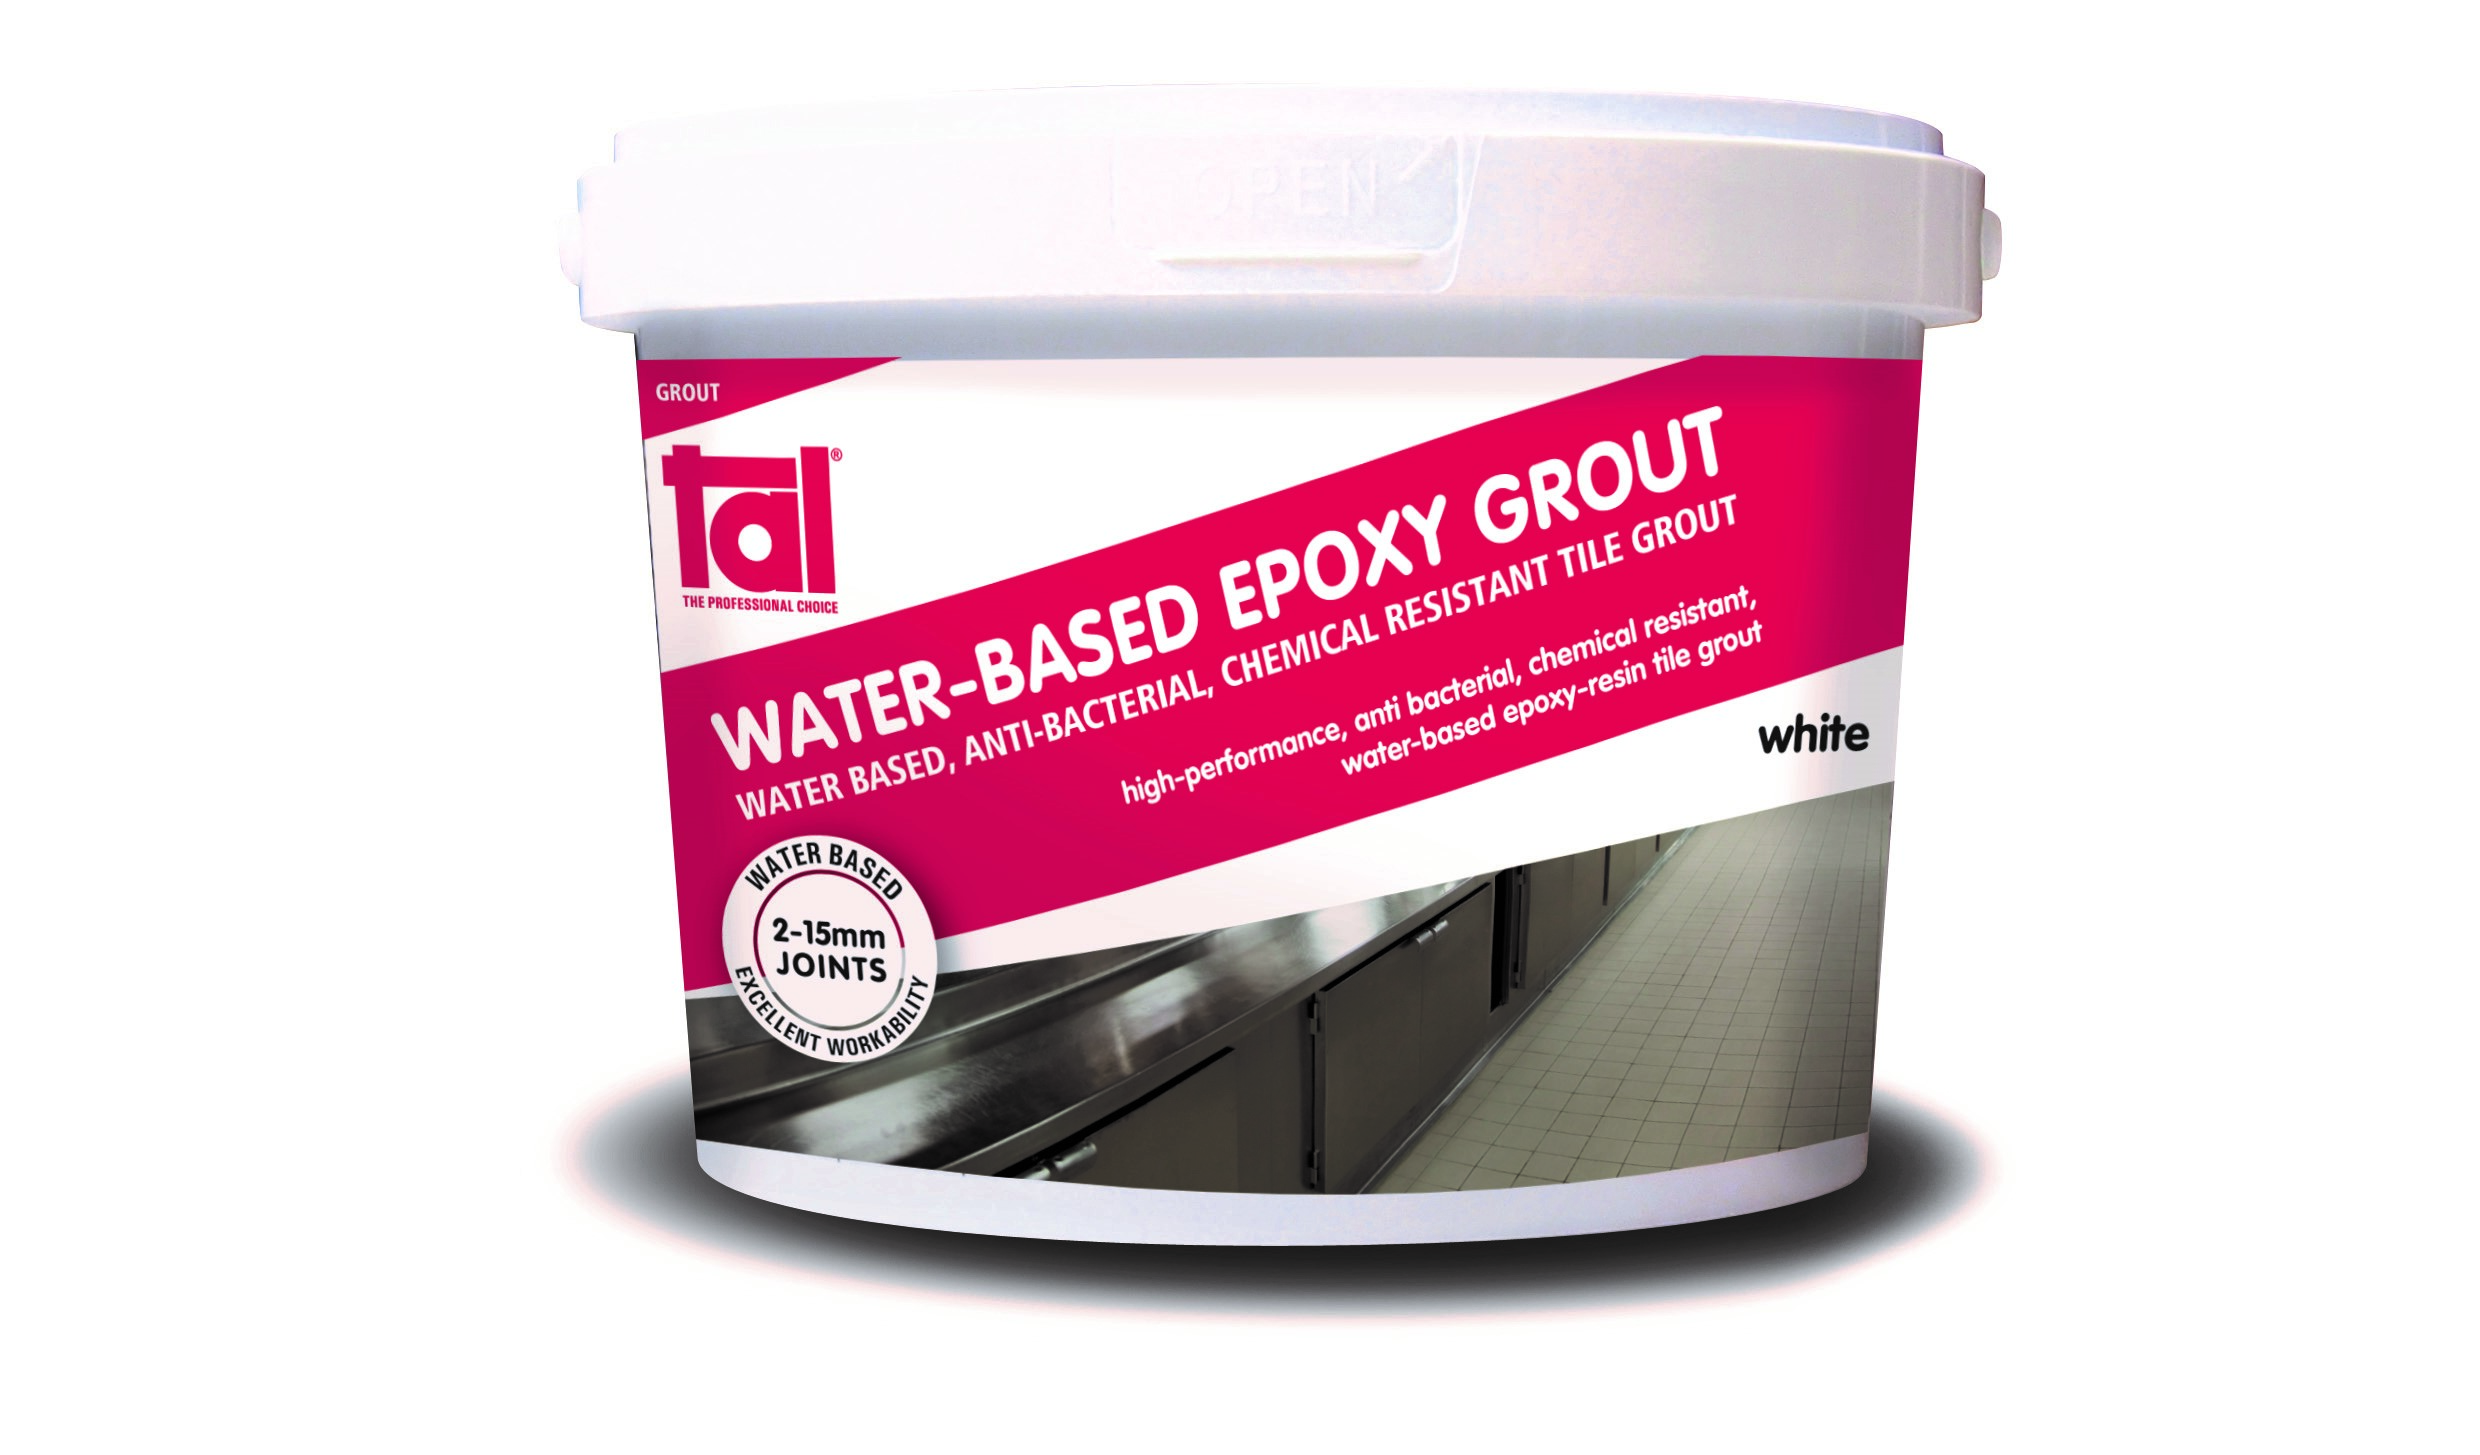 TAL introduces first water-based epoxy grout to the market